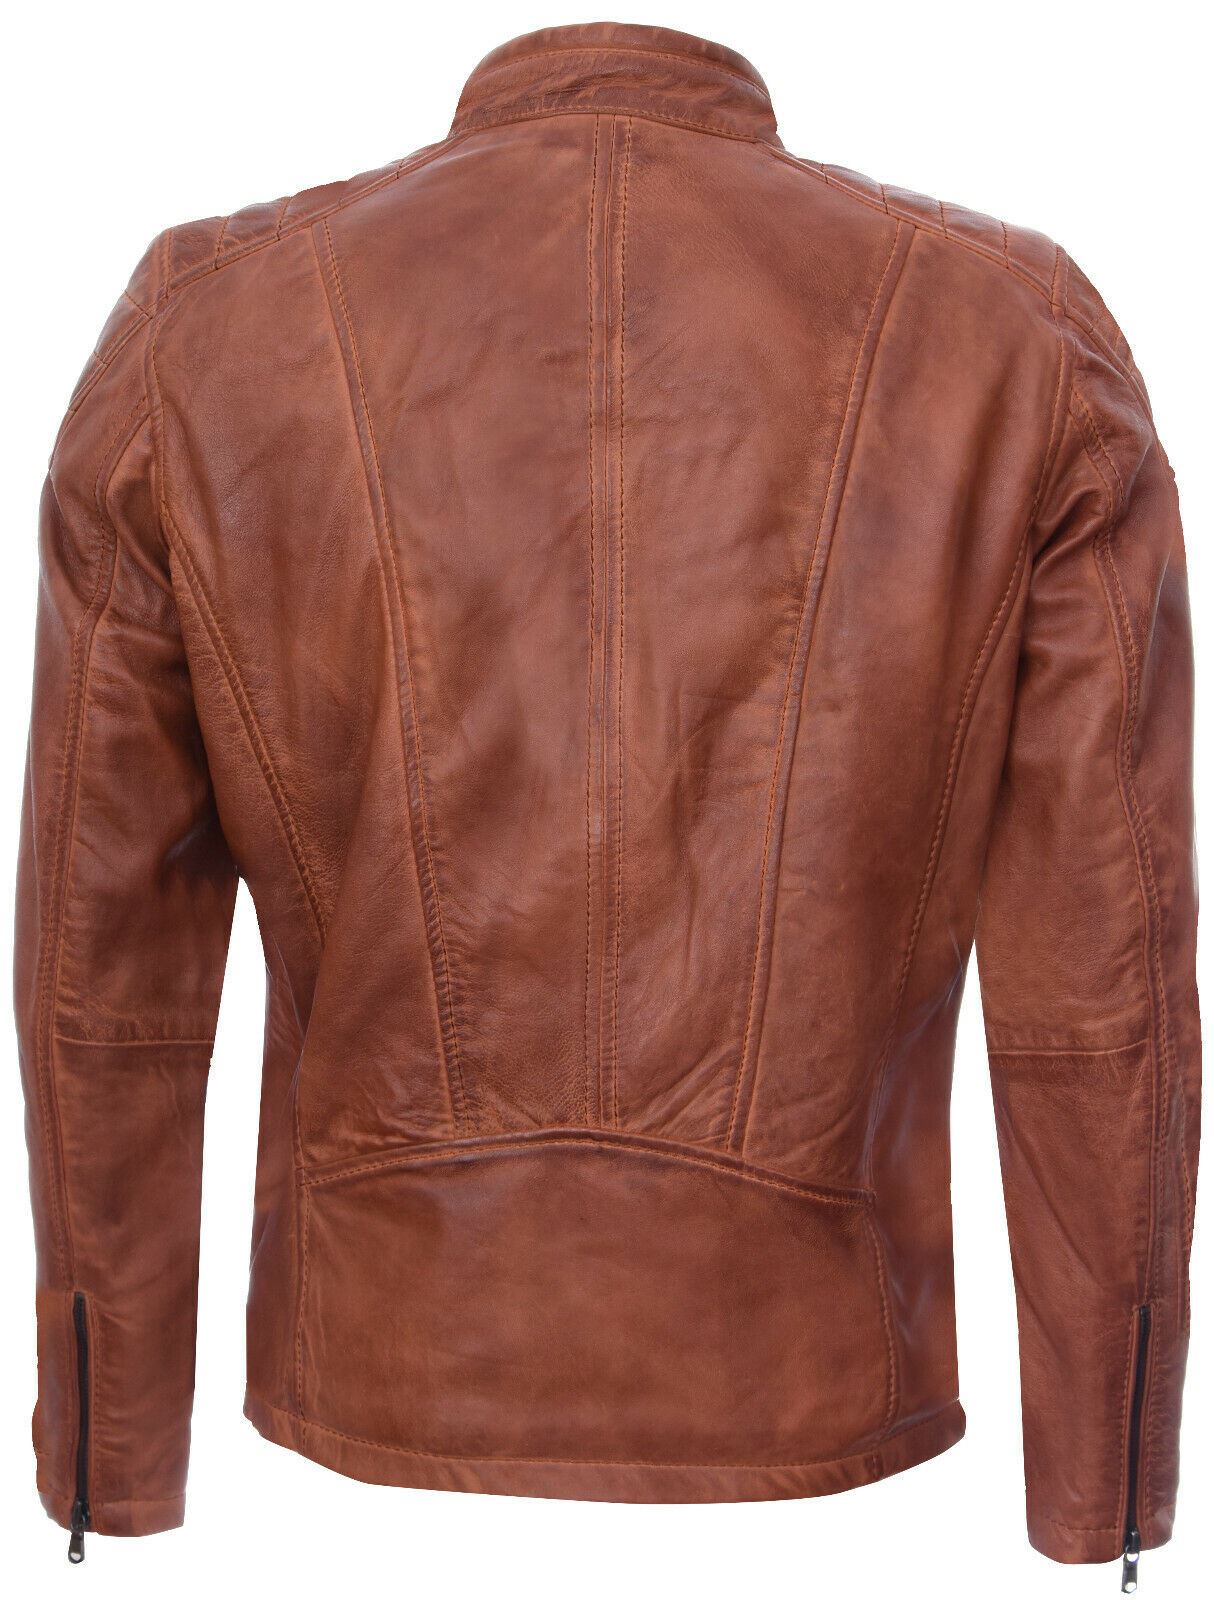 Mens Leather Jacket Vintage Quilted Retro Racing Zipped Biker - Bratislava - Upperclass Fashions 